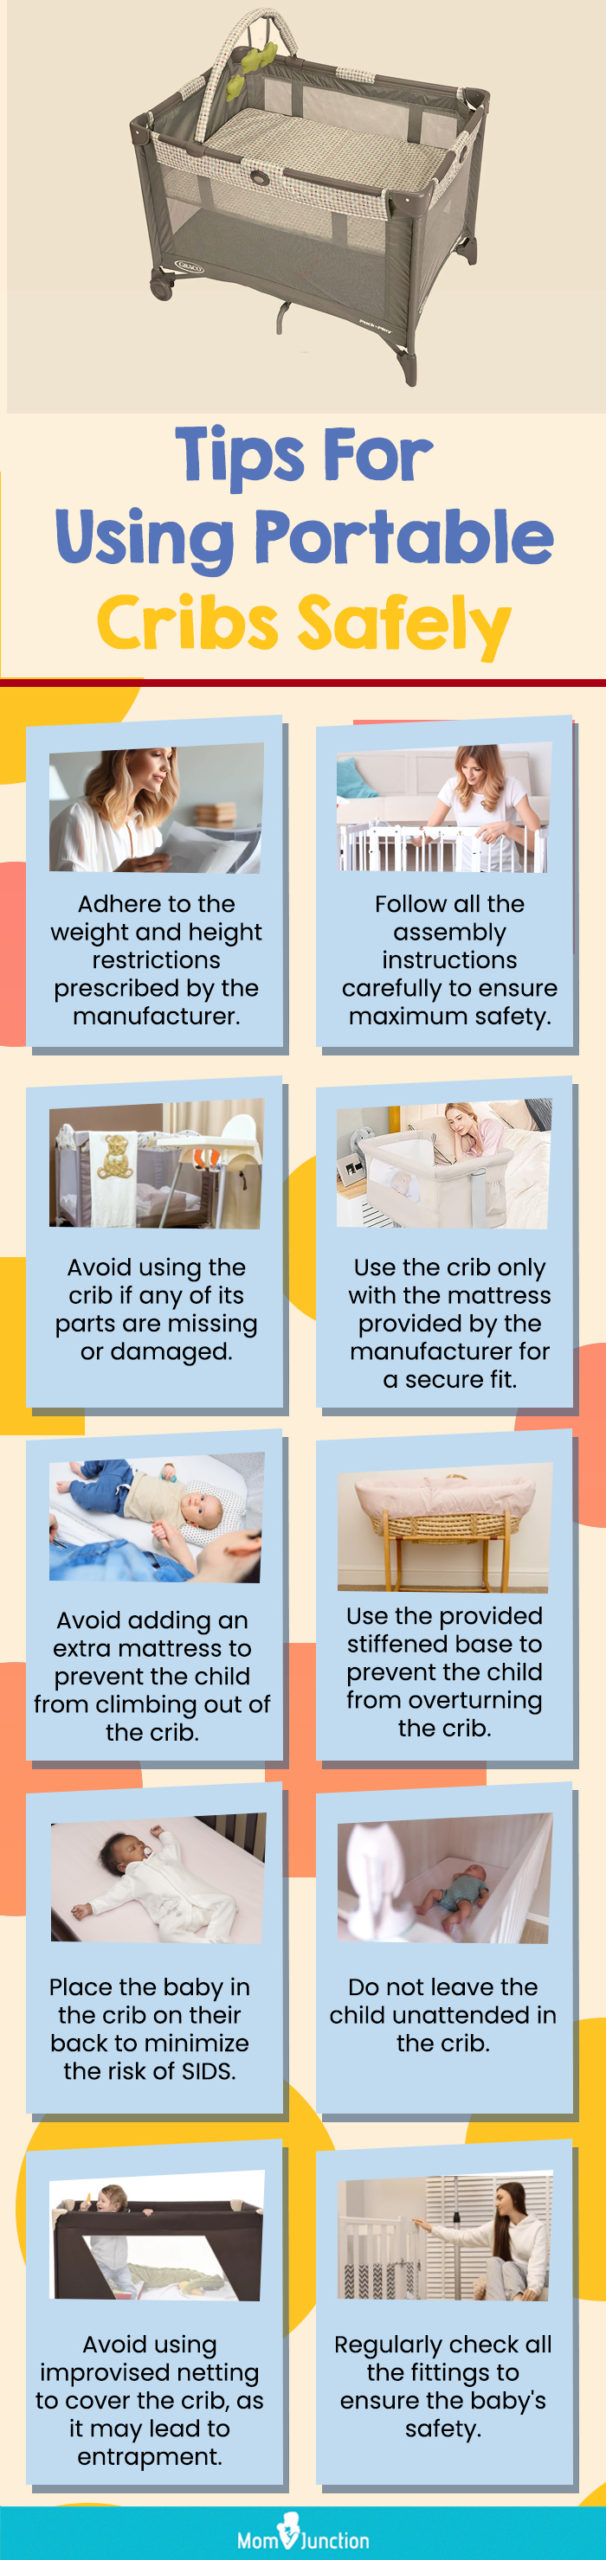 Tips For Using Portable Cribs Safely (infographic)